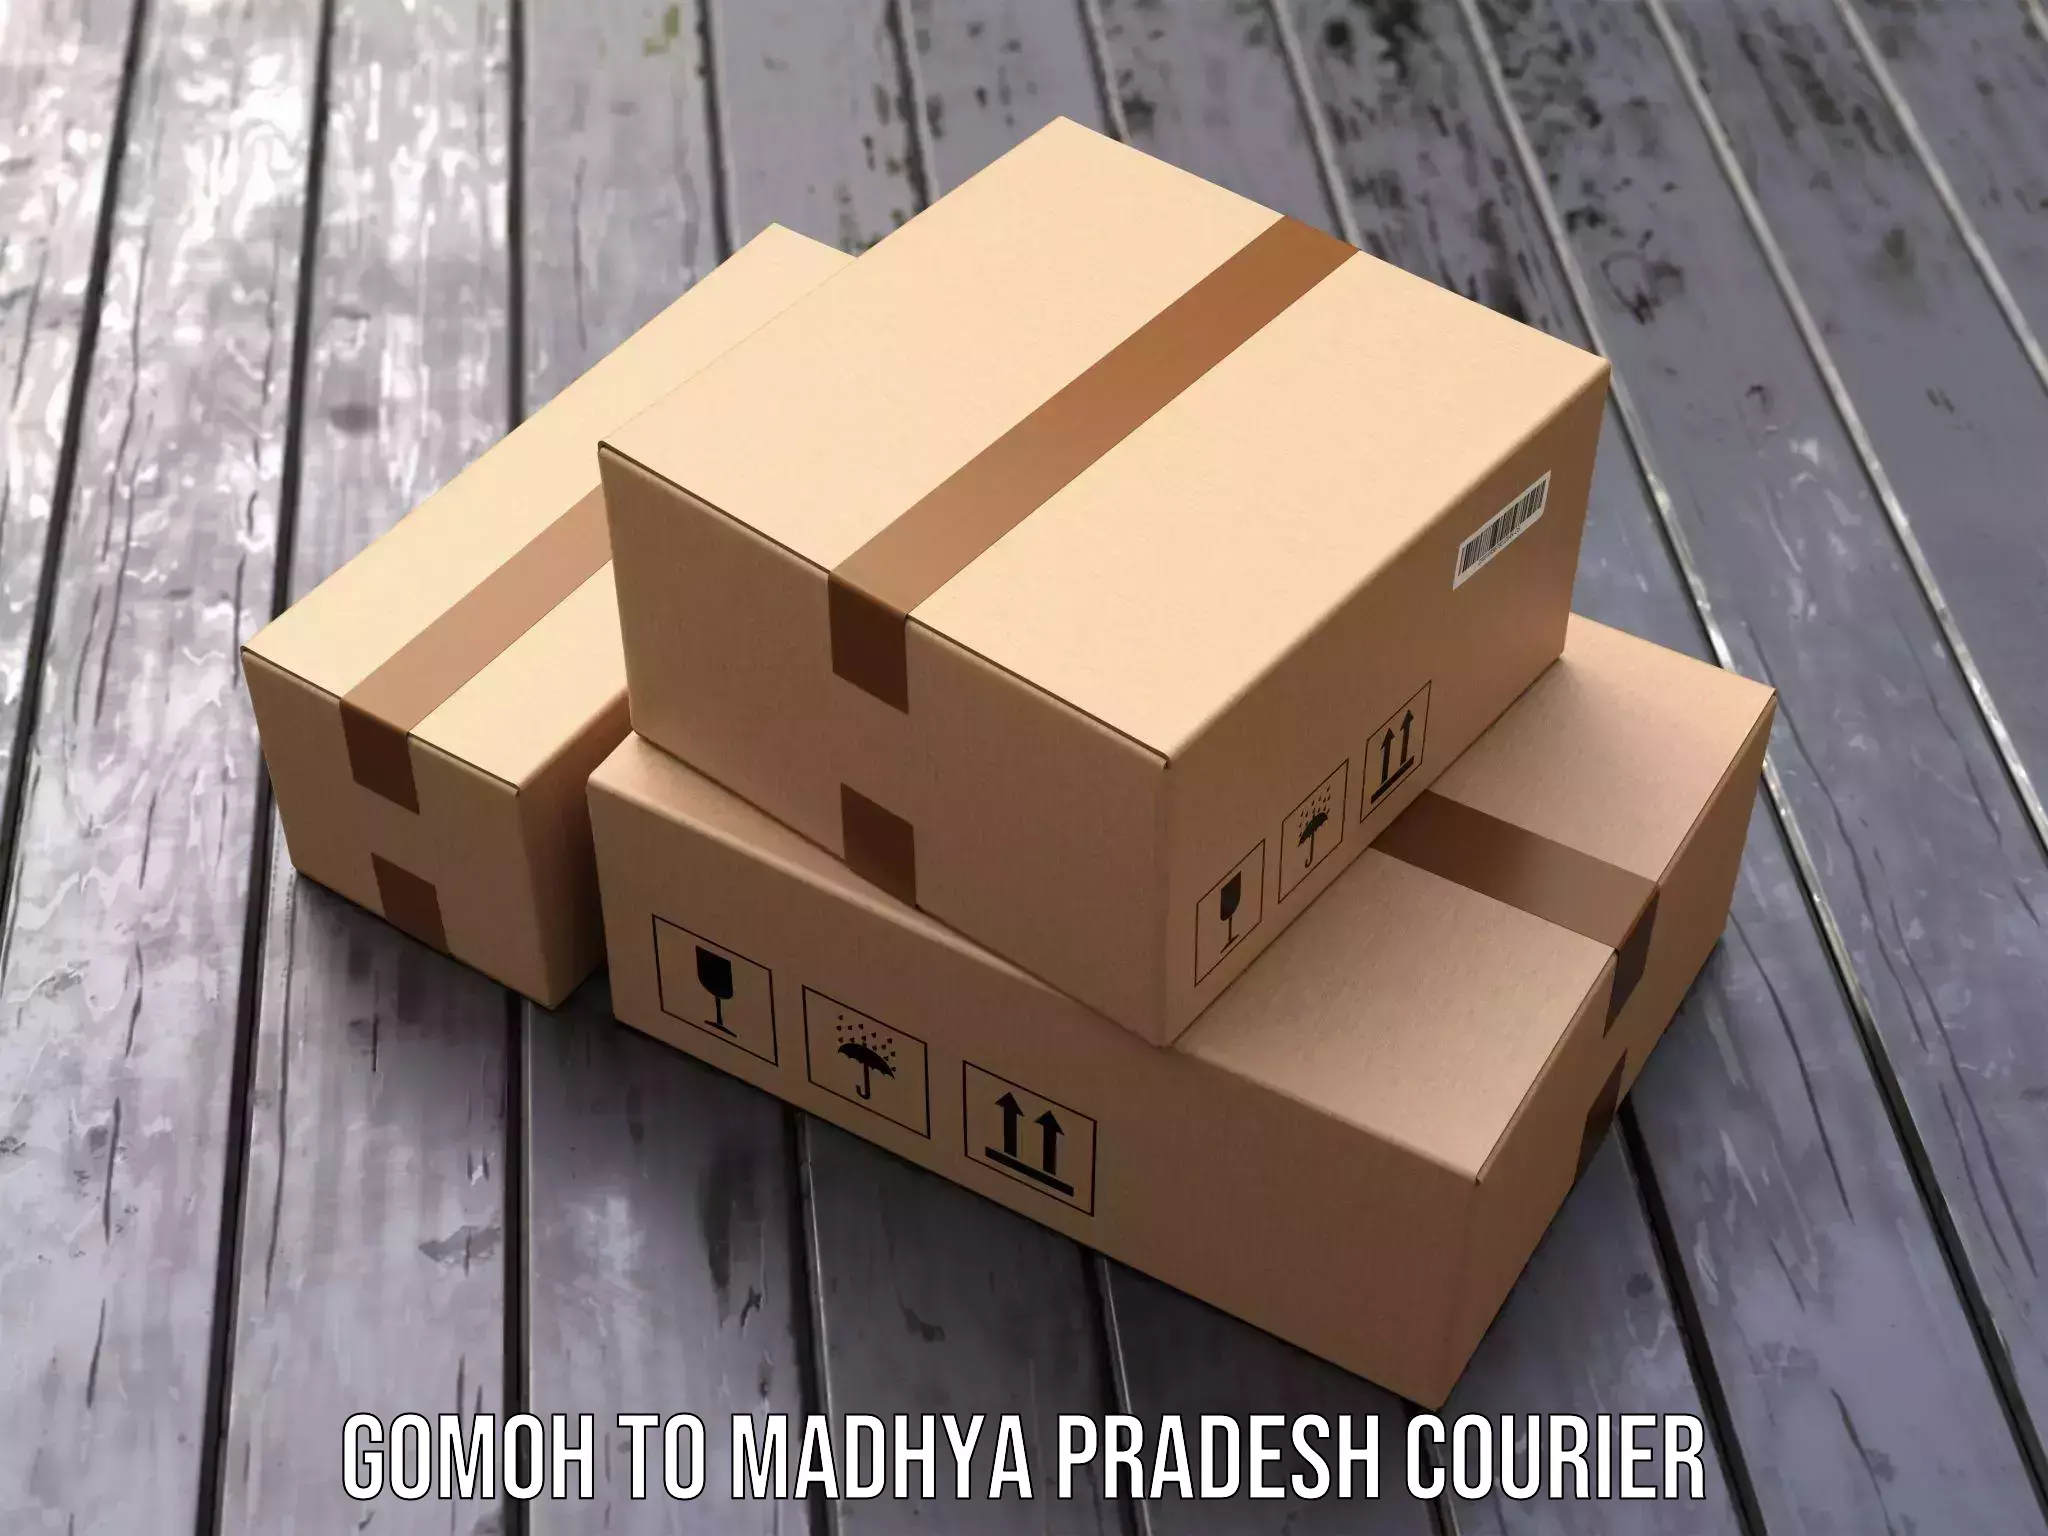 Courier membership in Gomoh to Morena